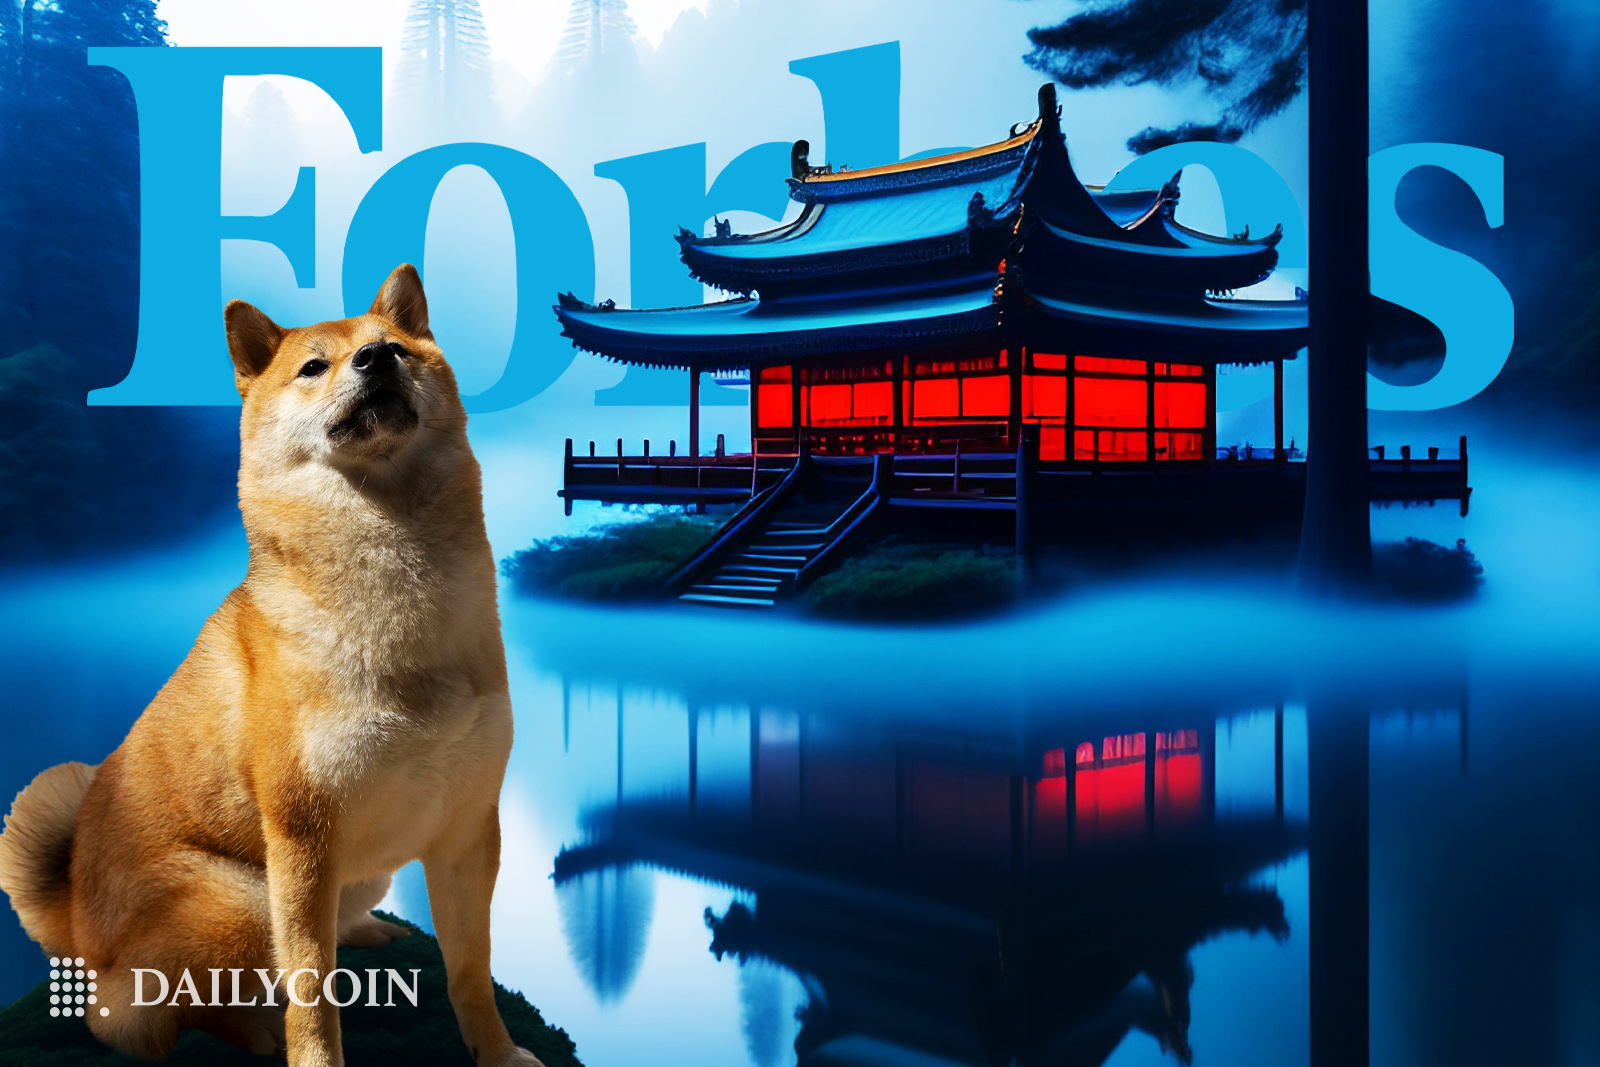 Proud Shiba Inu dog in a blue background with the WAGMI Temple shining red light on a Forbes magazine cover.